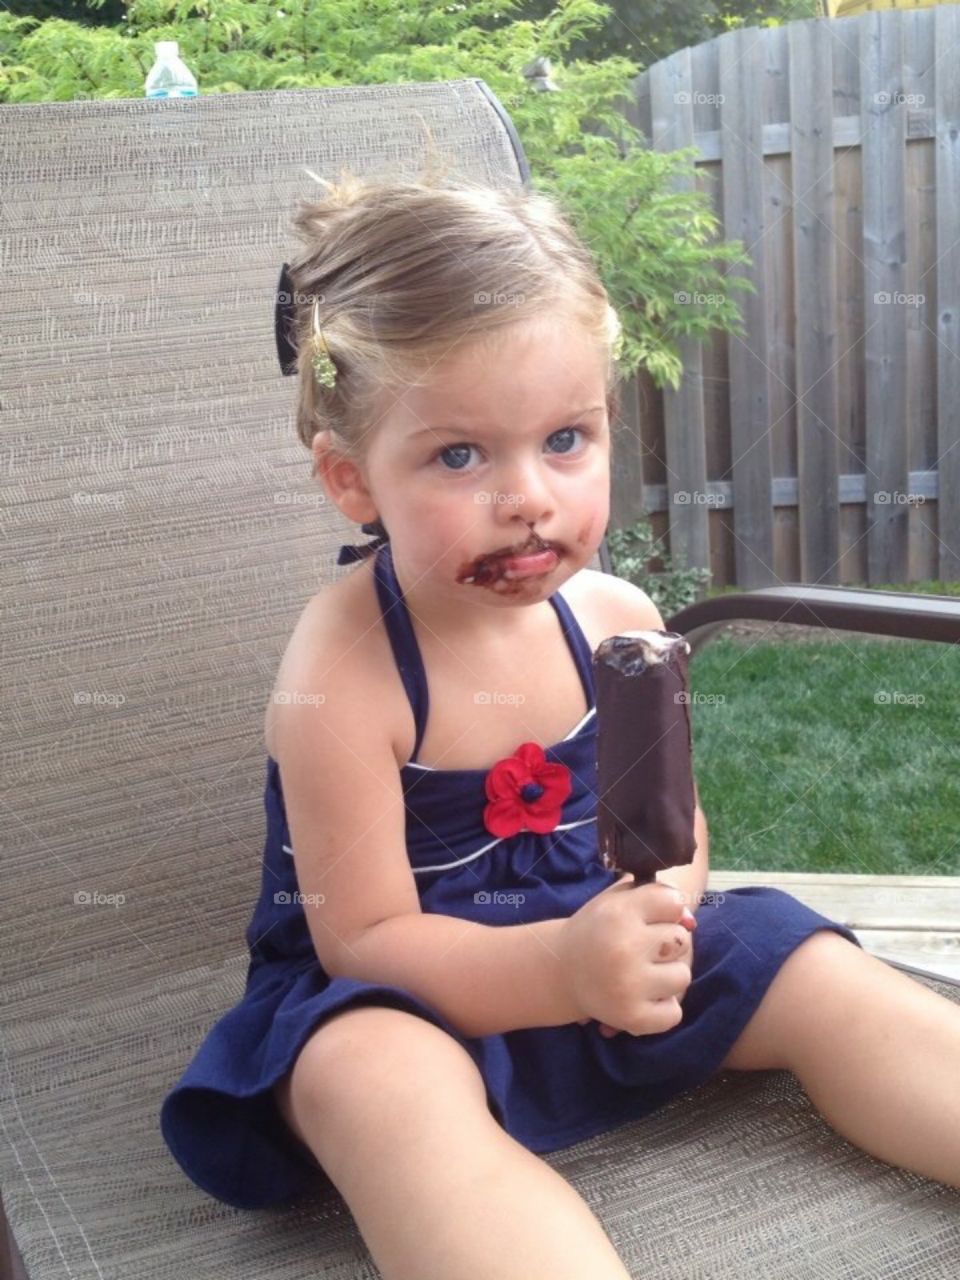 My little sister at 3 enjoying a fudge popsicle 